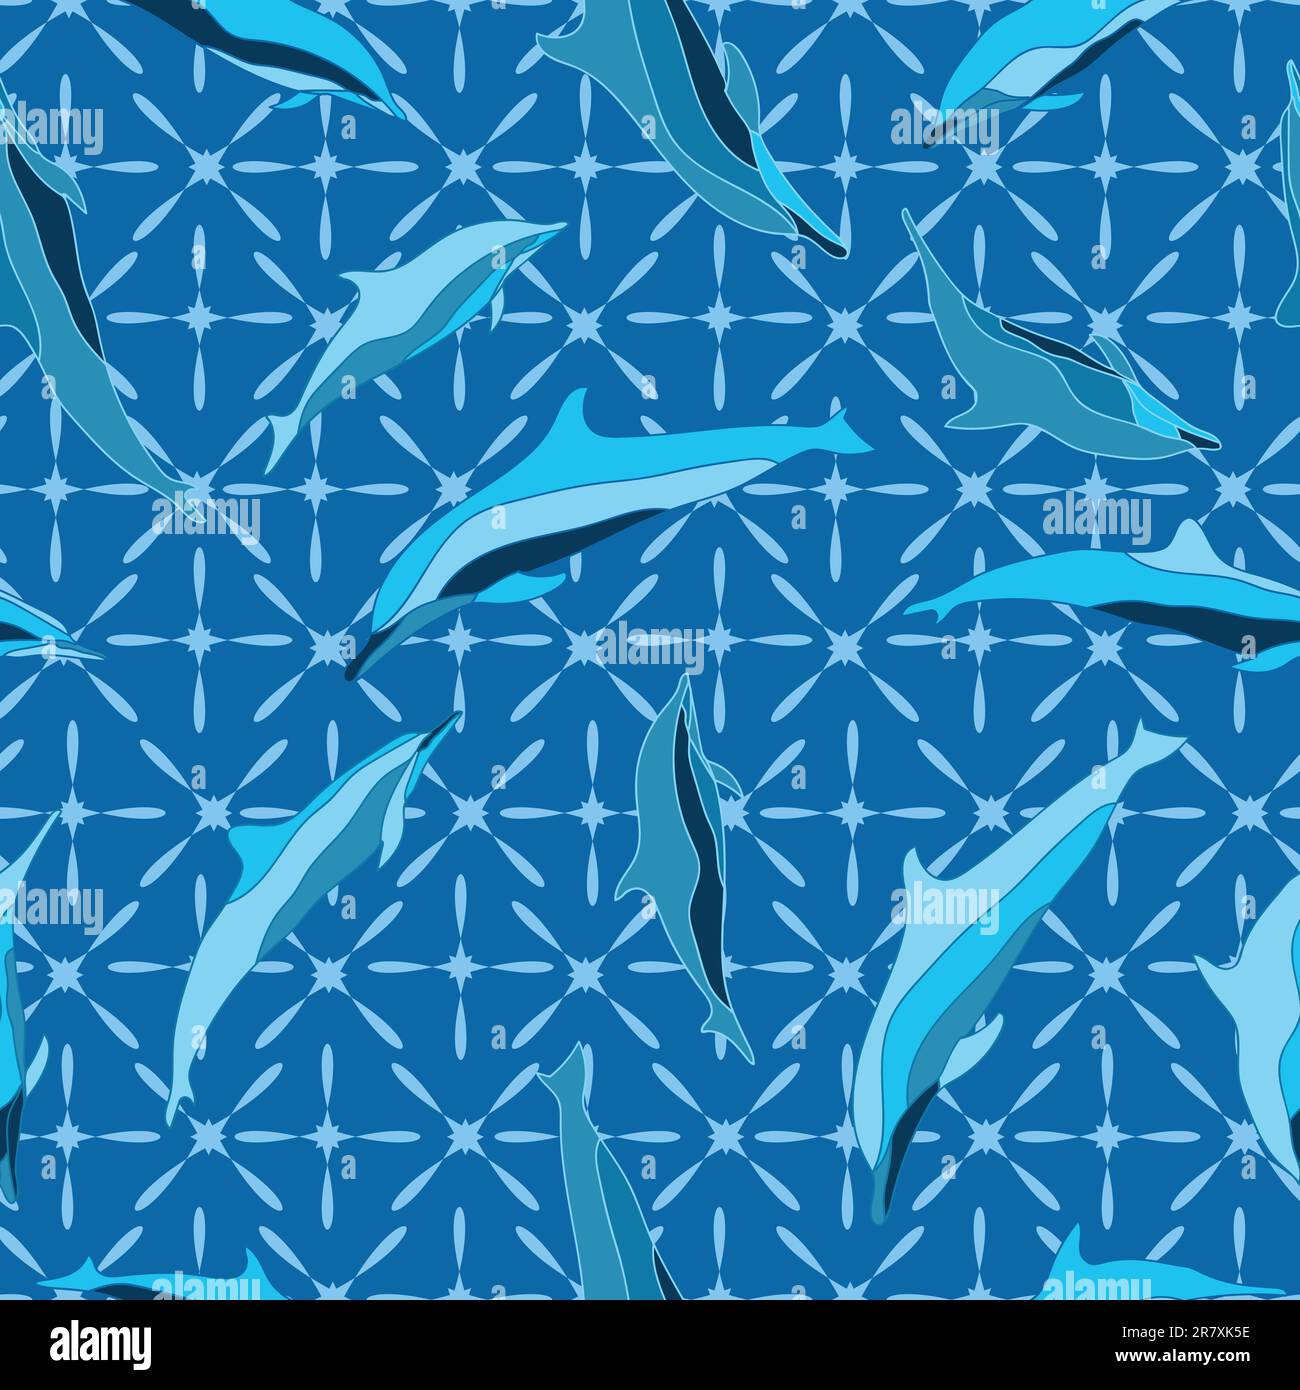 Dolphin Seamless Pattern, Marine Sea Creature. Clymene dolphin vector illustration. Perfect for Textile, Wallpaper, Packaging and fashion print. Stock Vector